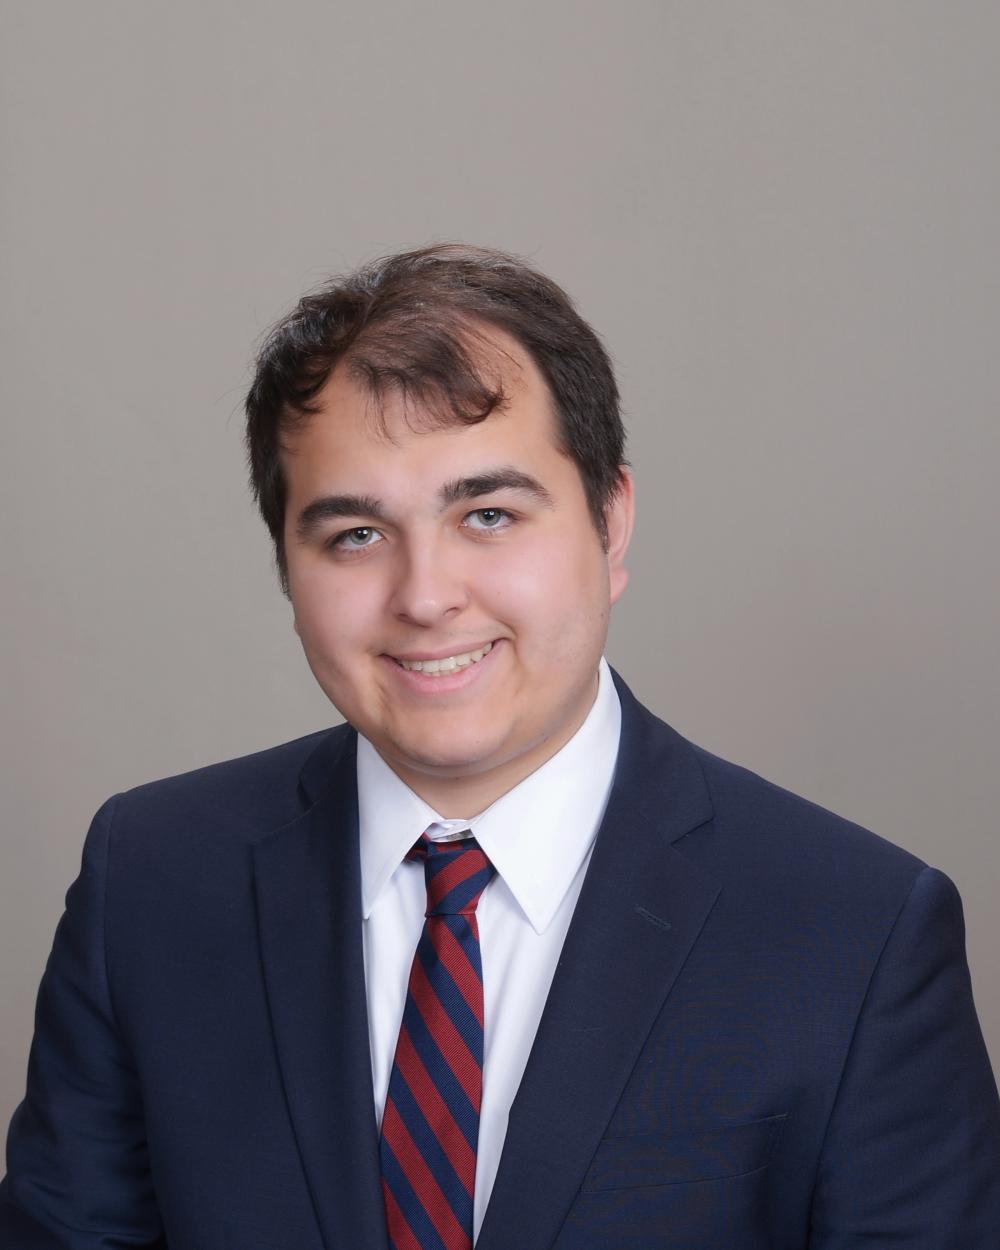 sebastian Garcia Lavin headshot wearing a blue suit with navy and maroon striped tie